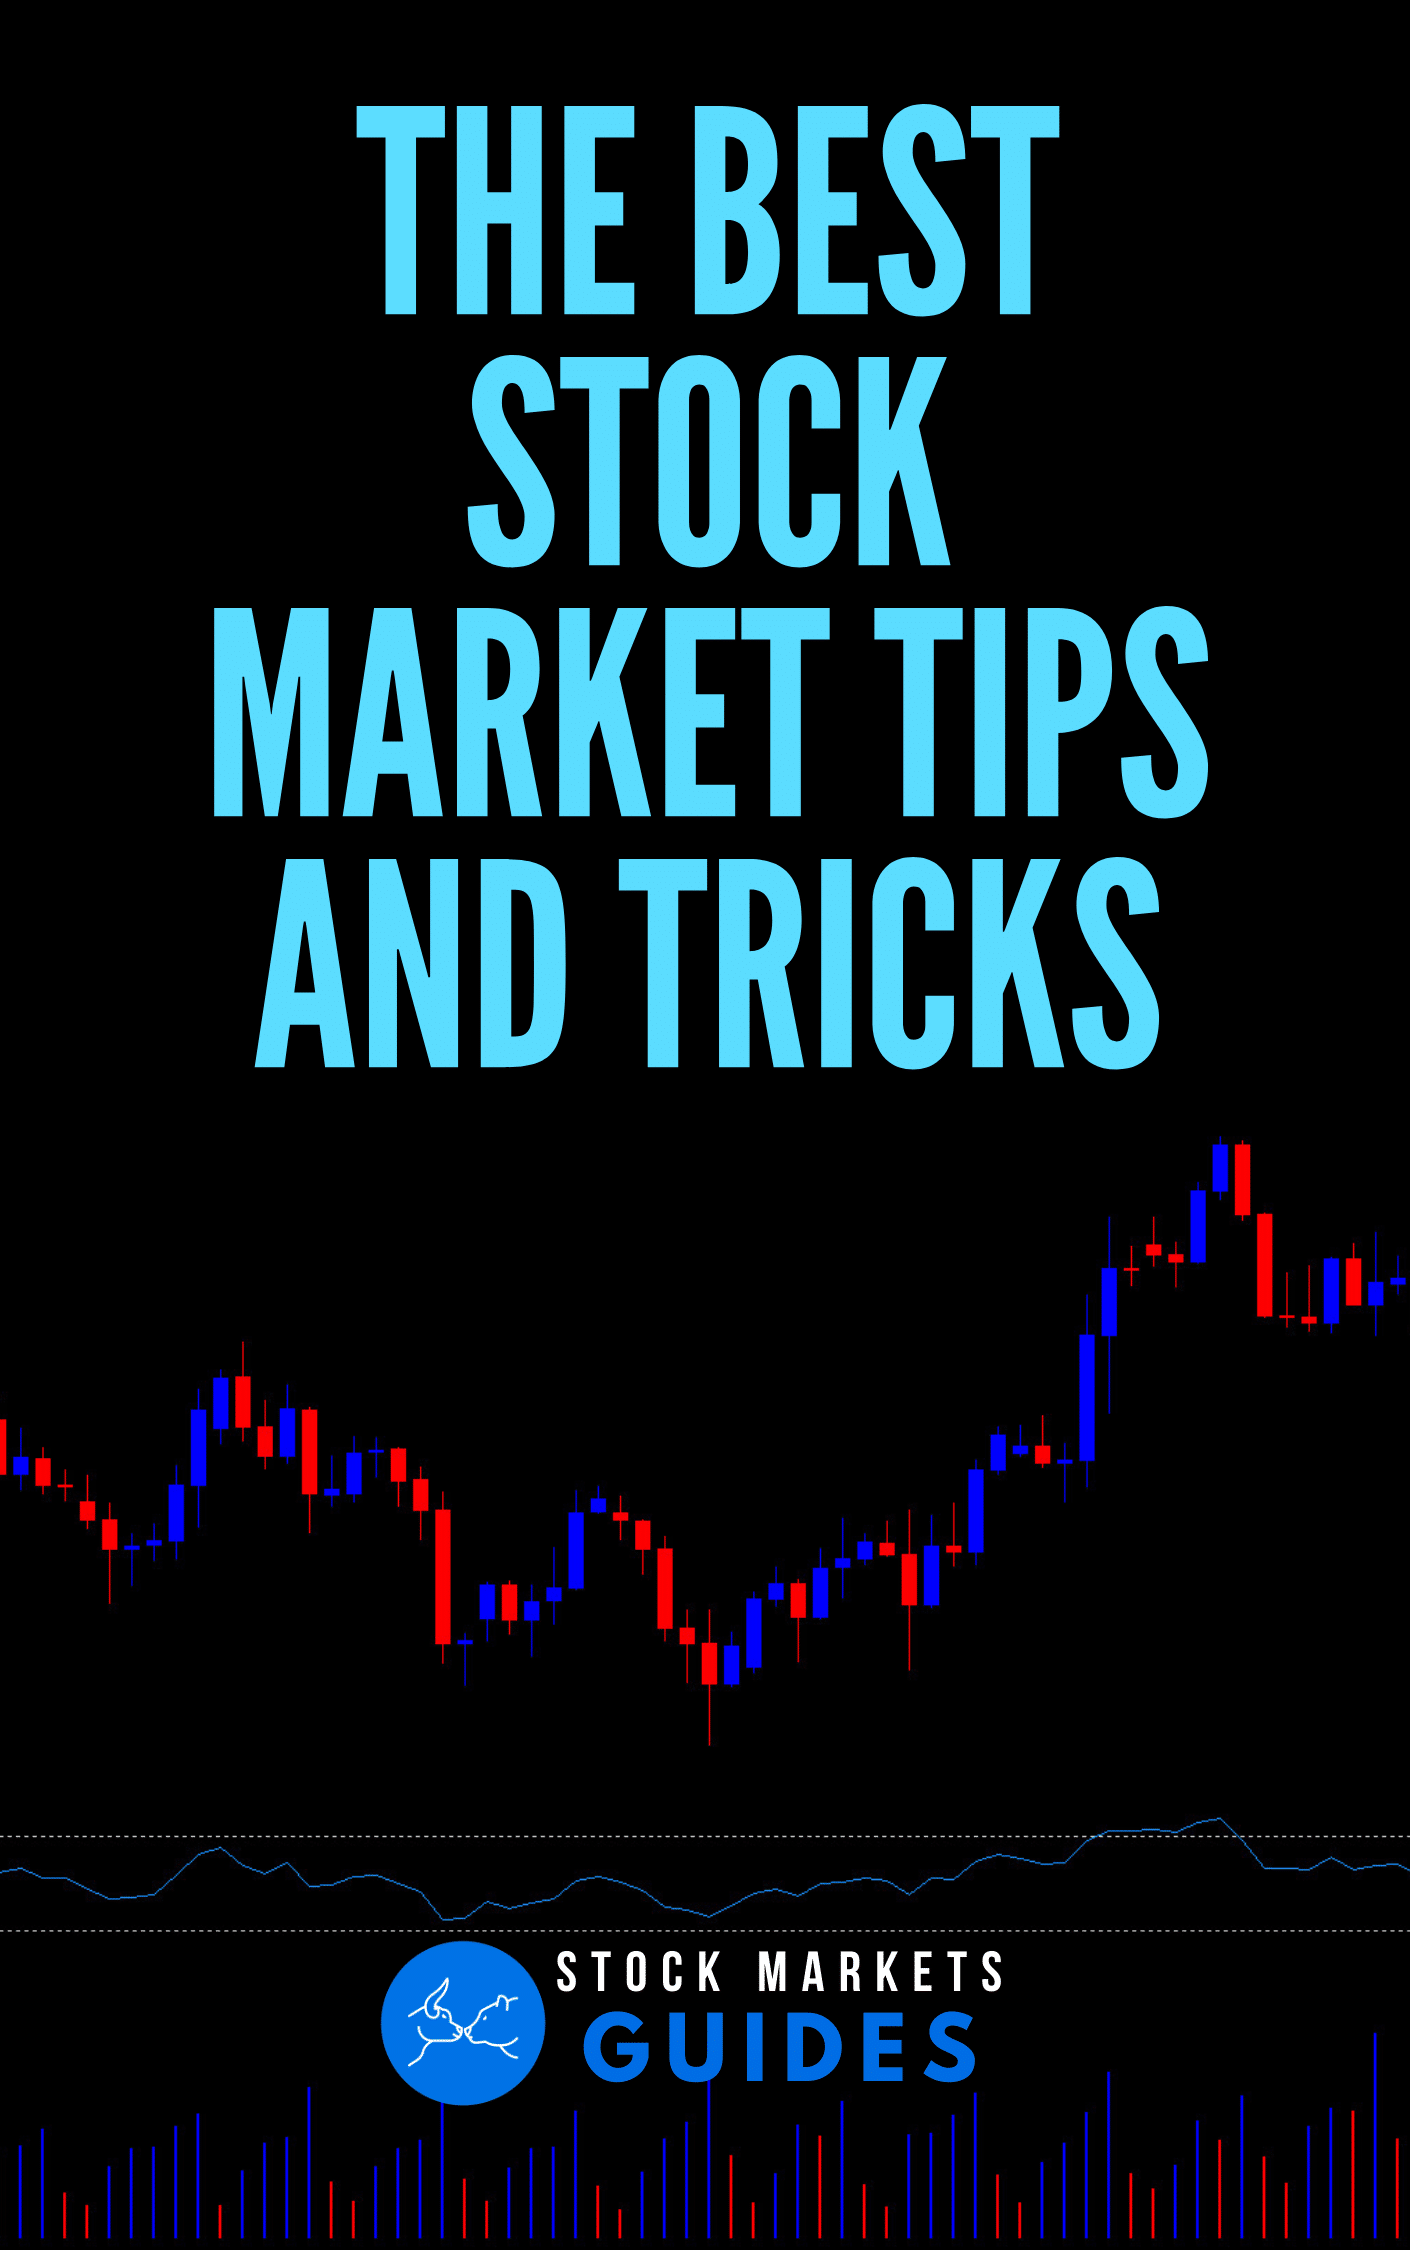 Stock guide